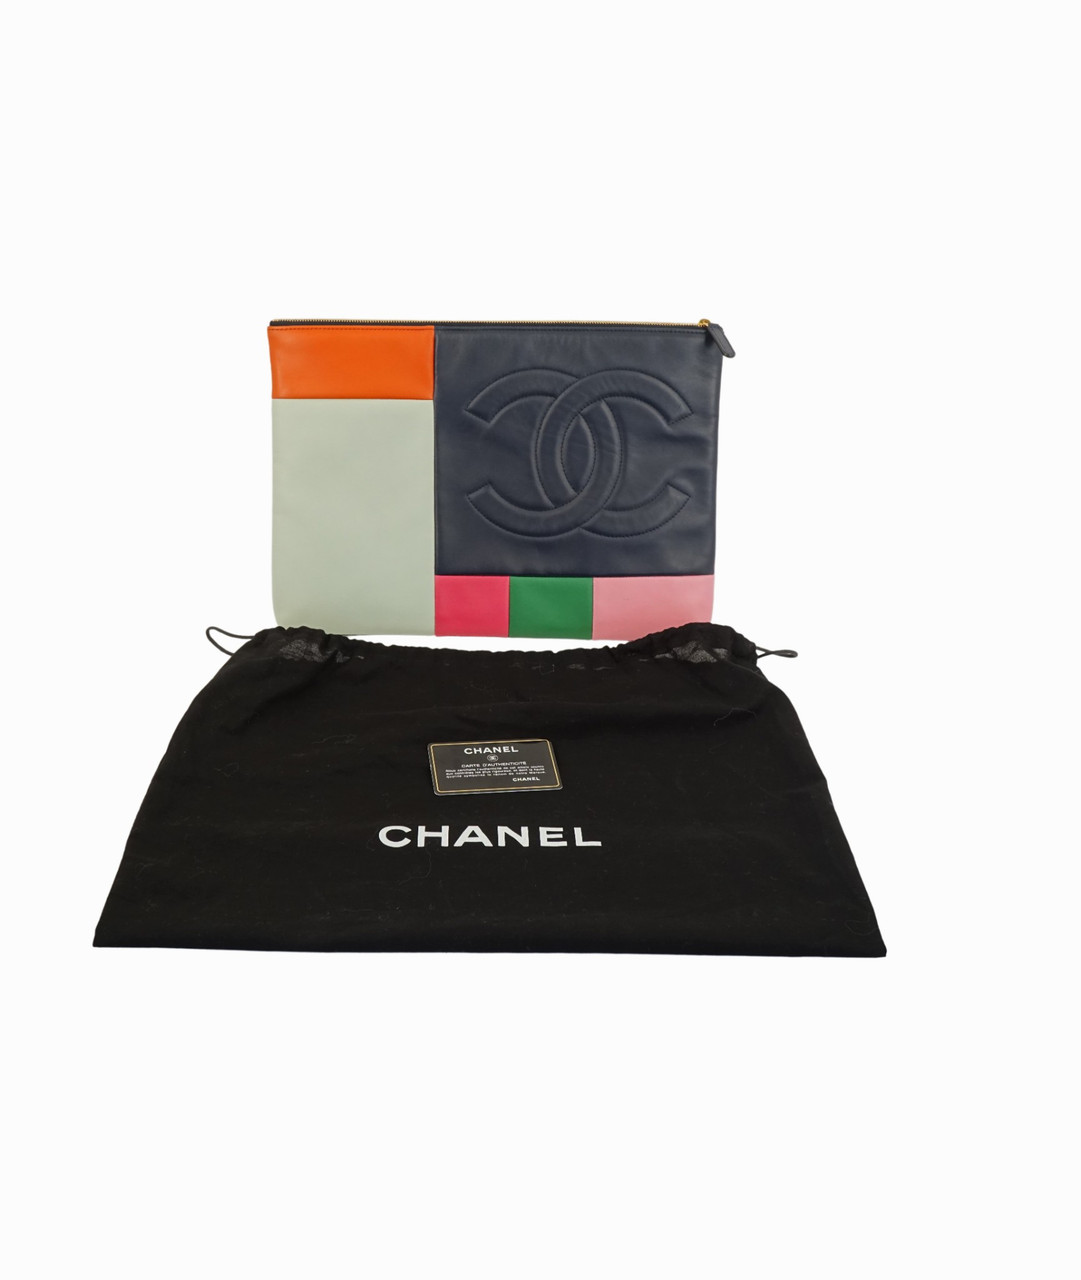 CHANEL, Bags, Chanel Lambskin Deep Red Wallet Dust Bag And Box